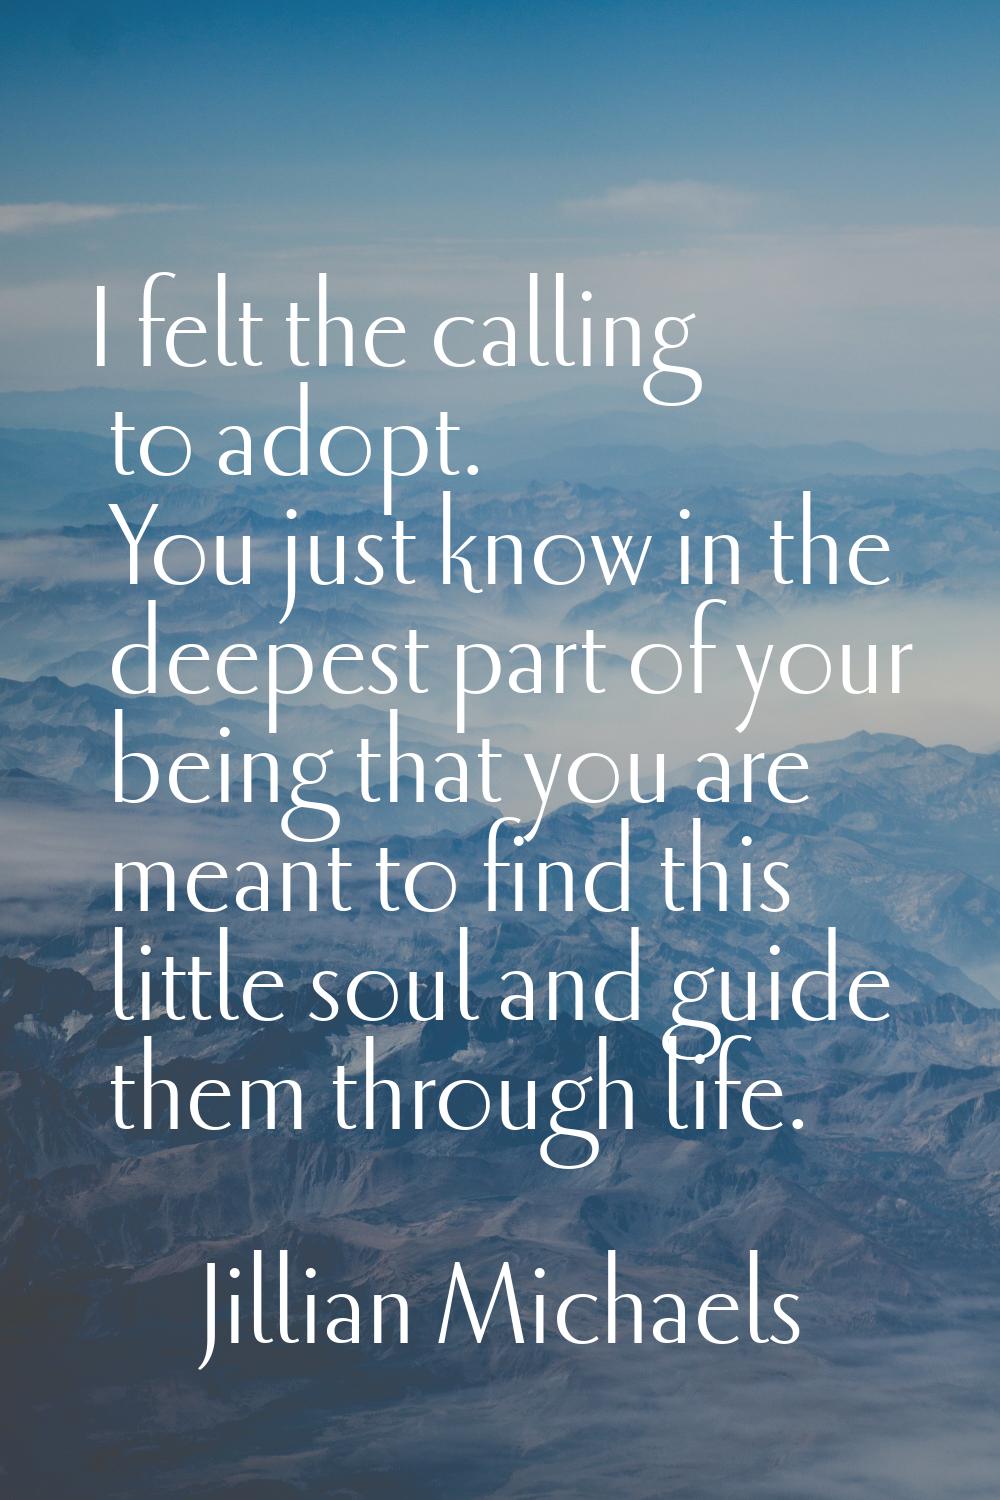 I felt the calling to adopt. You just know in the deepest part of your being that you are meant to 